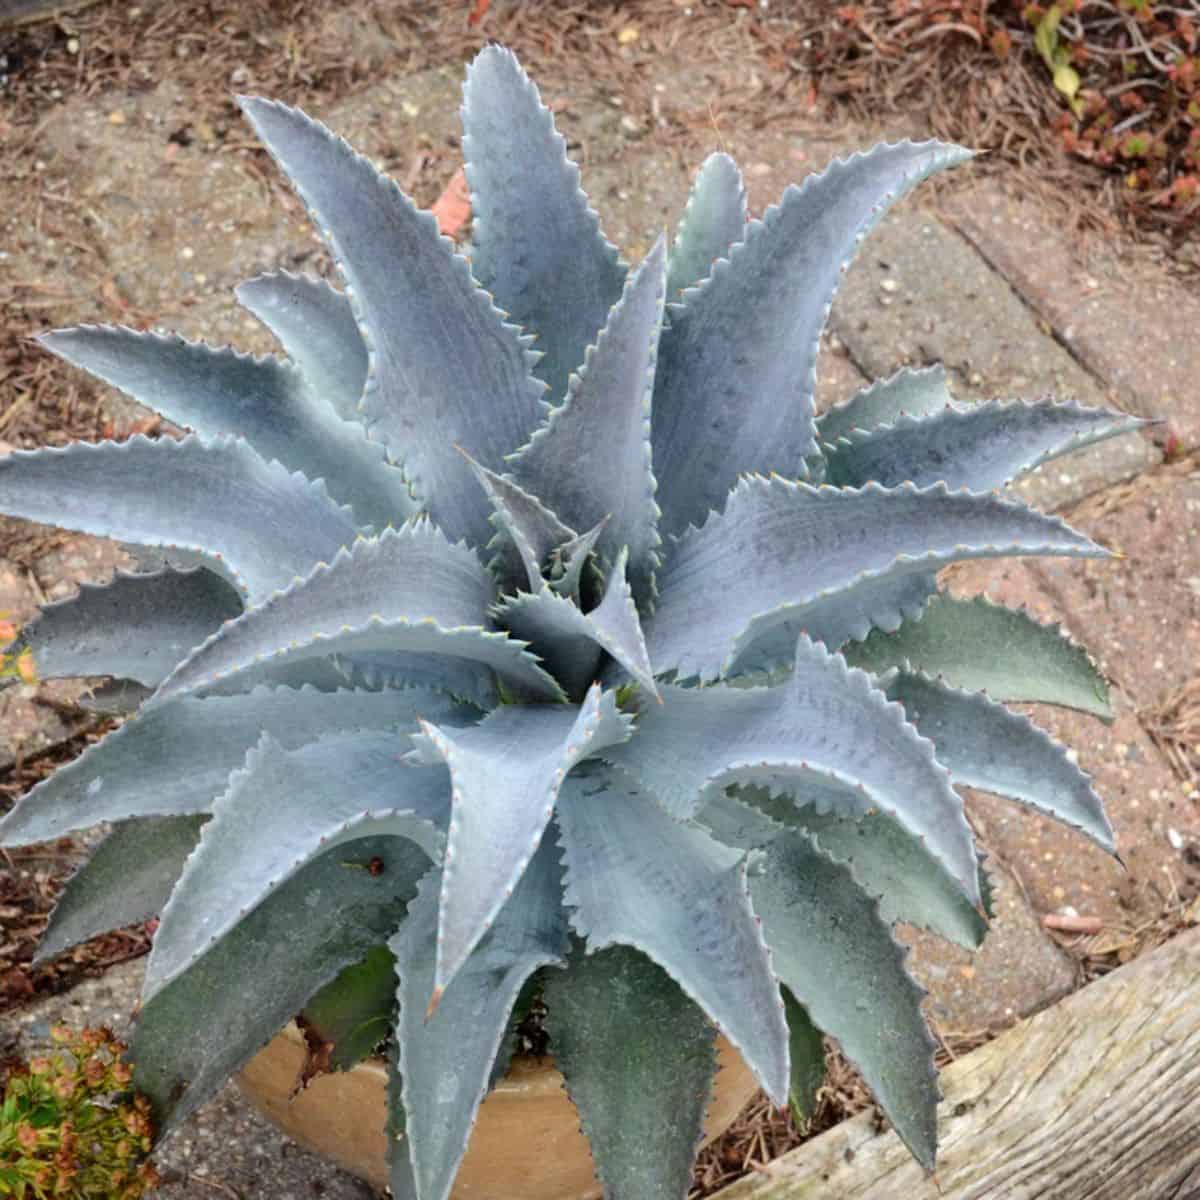 Mangave Silver Fox variety grows in a pot.